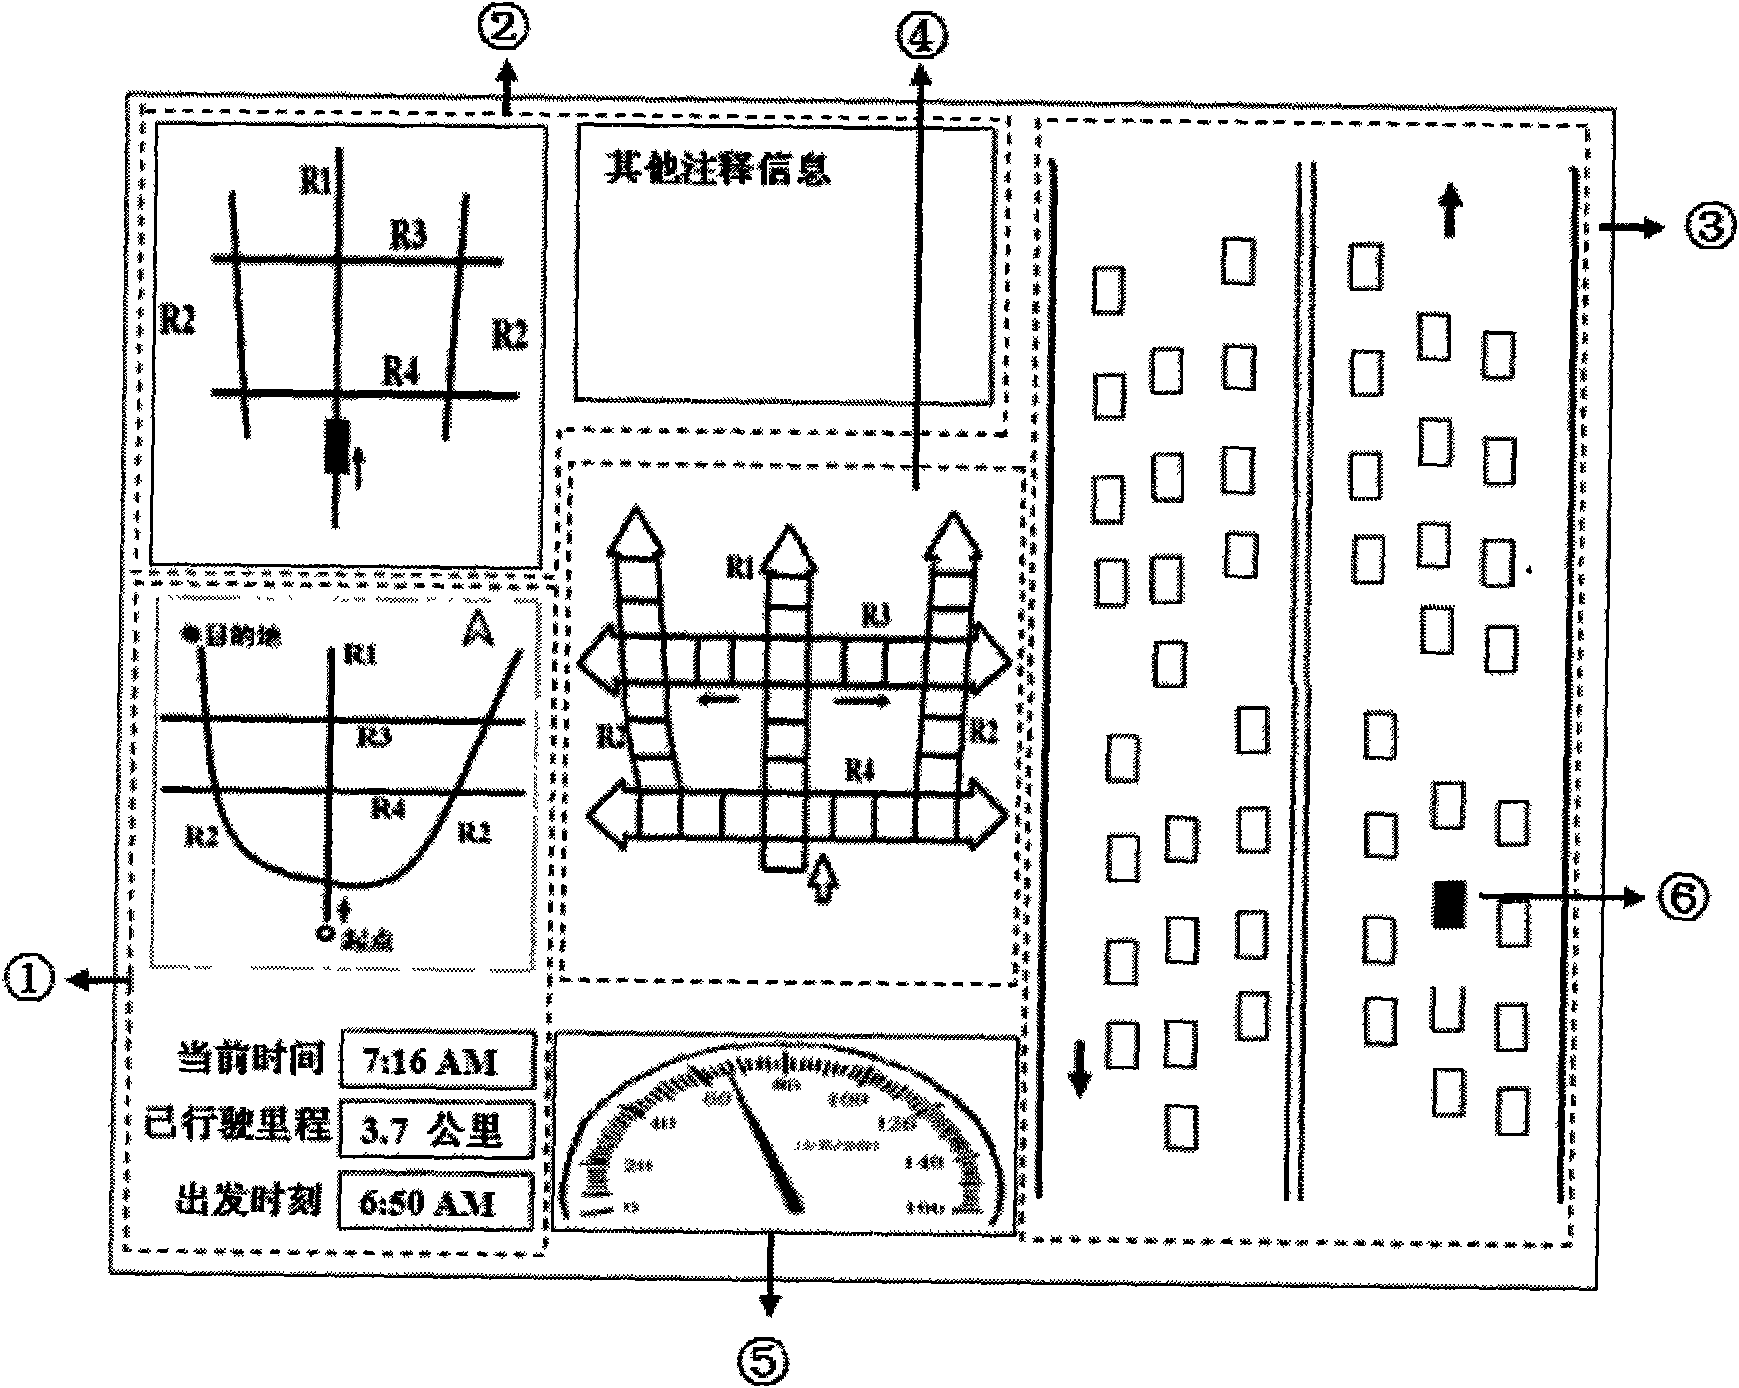 Computer dynamic simulation method of driver dynamic response behavior about graphic path information board